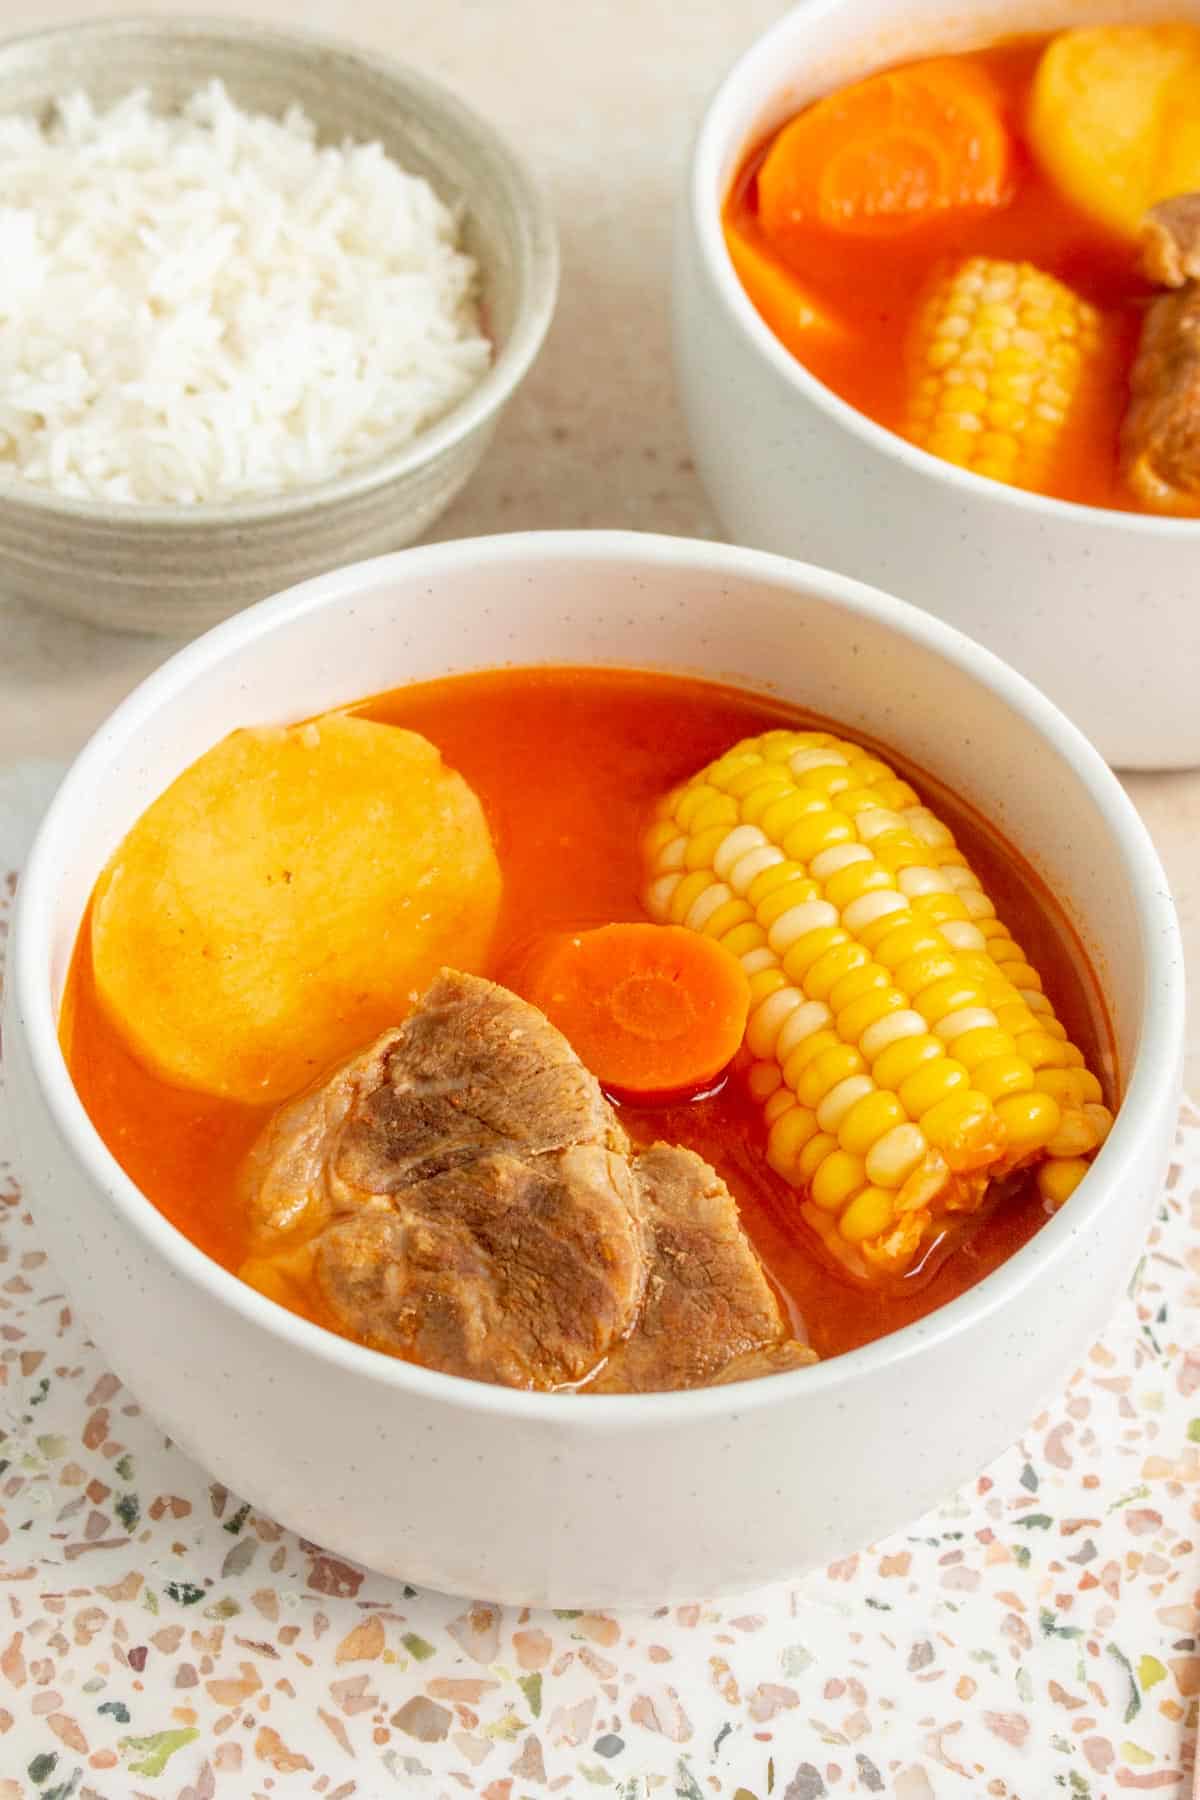 A bowl of soup with pork, corn on the cob, carrot, and potato with a bowl of rice in the background and another bowl of soup.